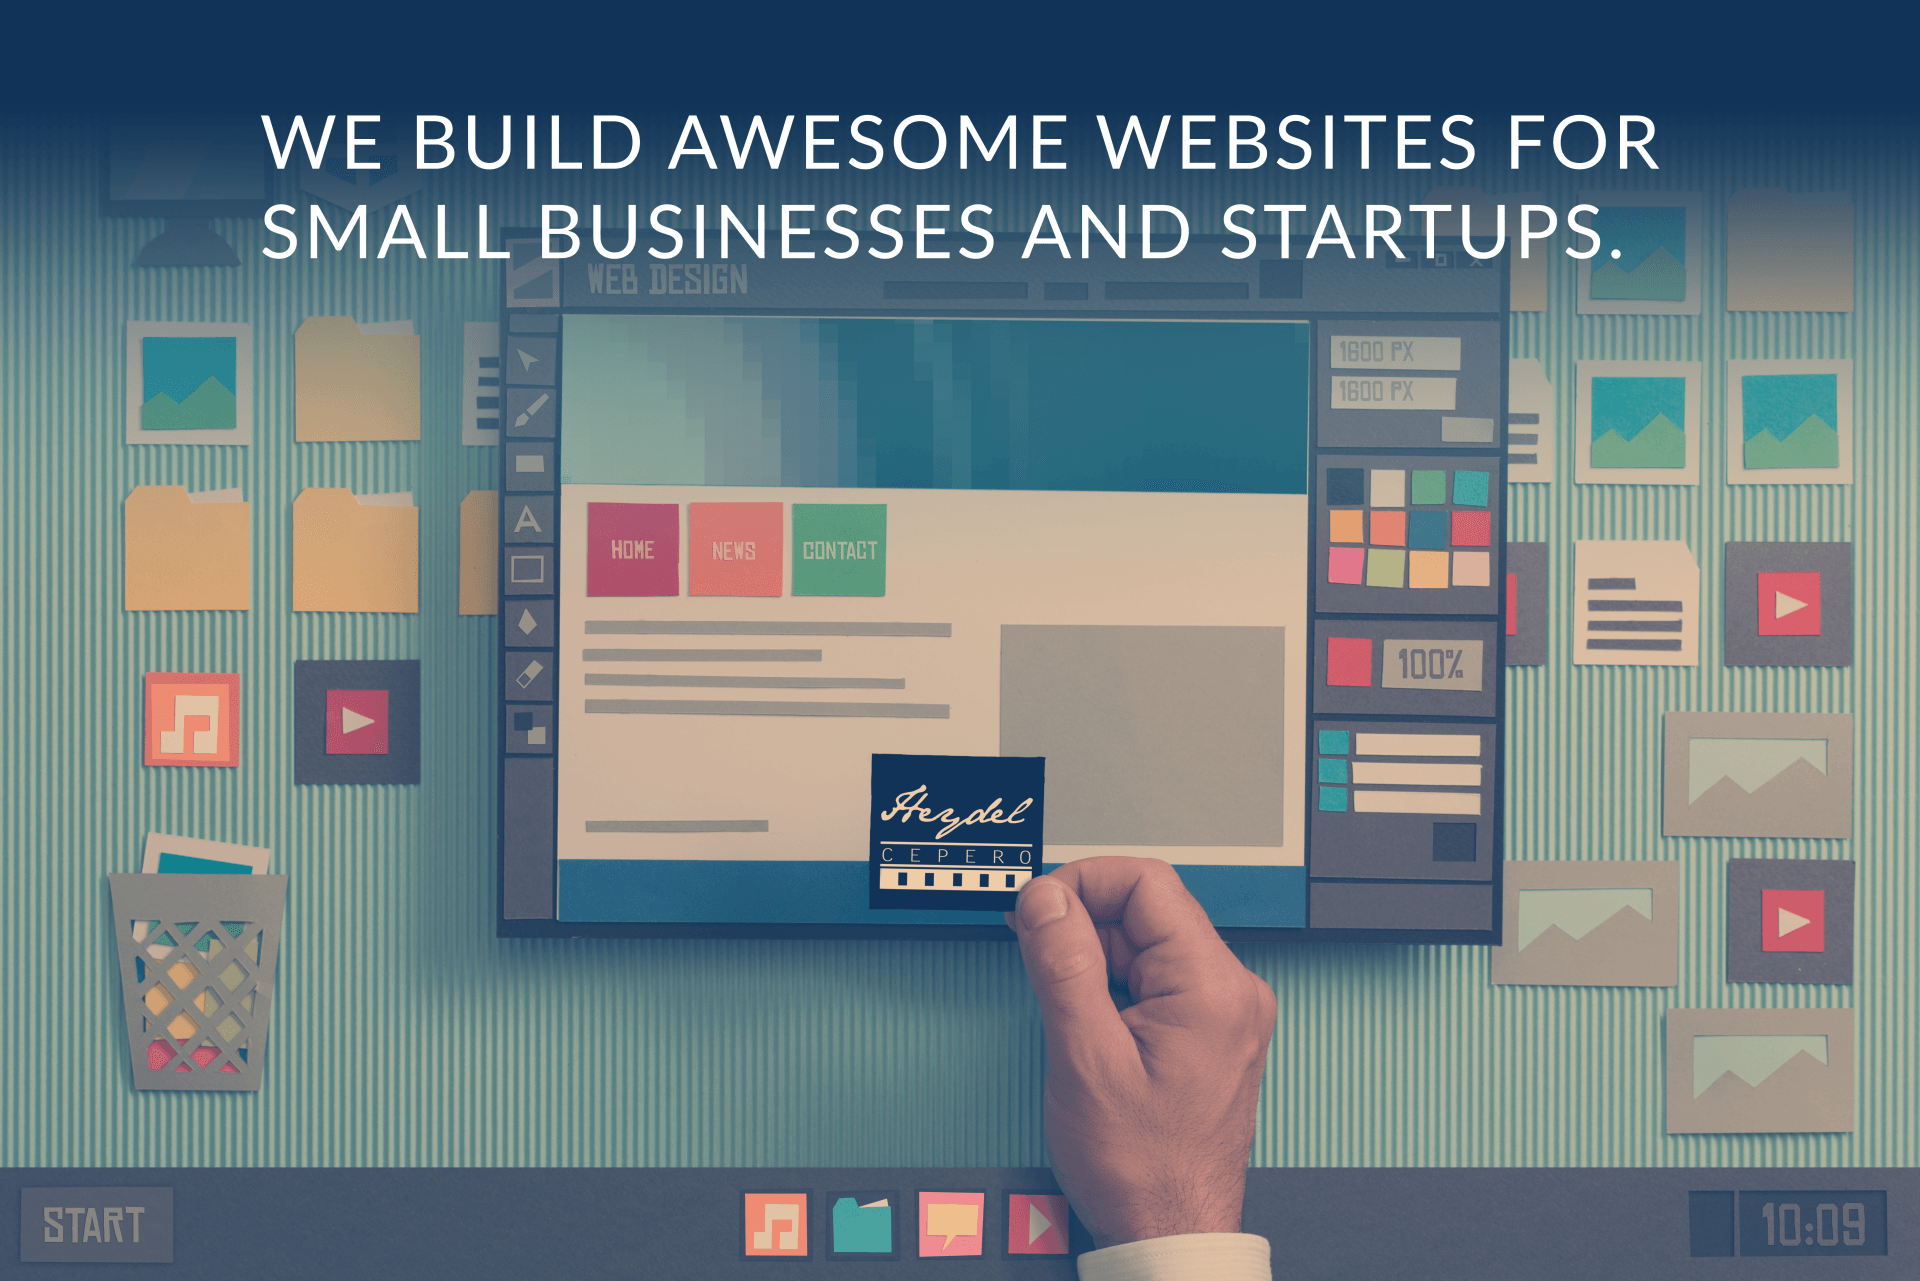 You Can Build A Business With These Website Ideas.